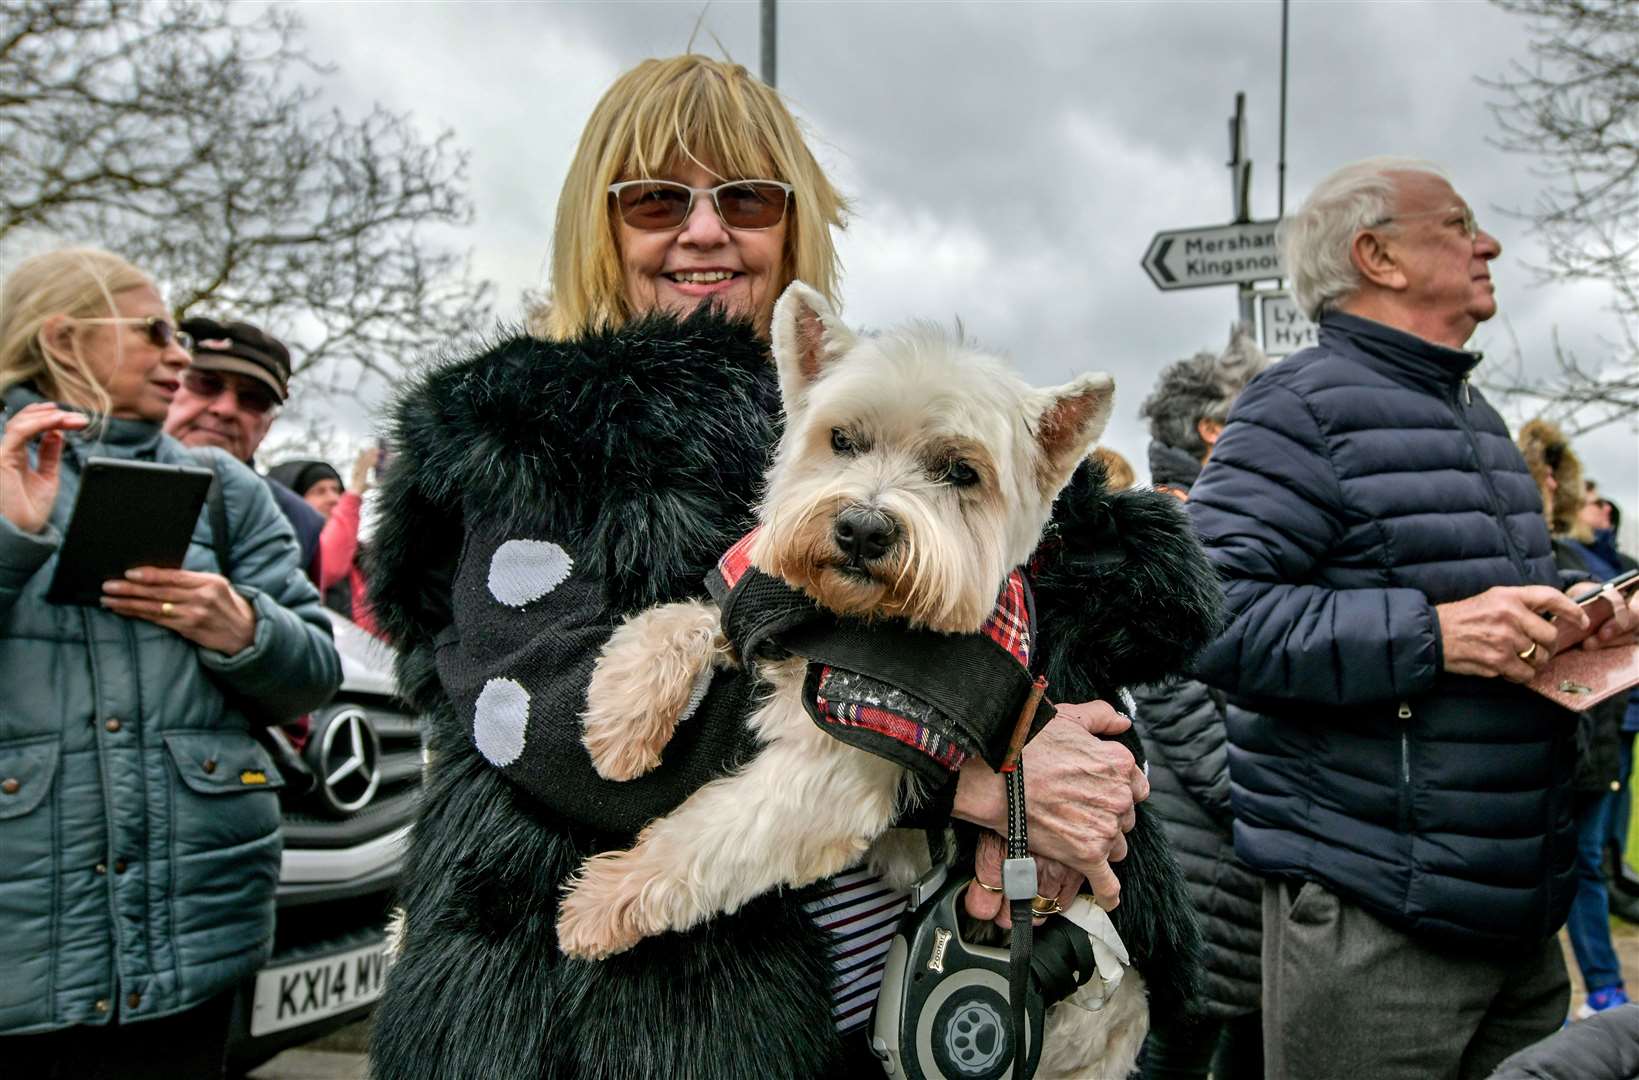 The TV presenter was known for his love of dogs. Picture: Stuart Brock